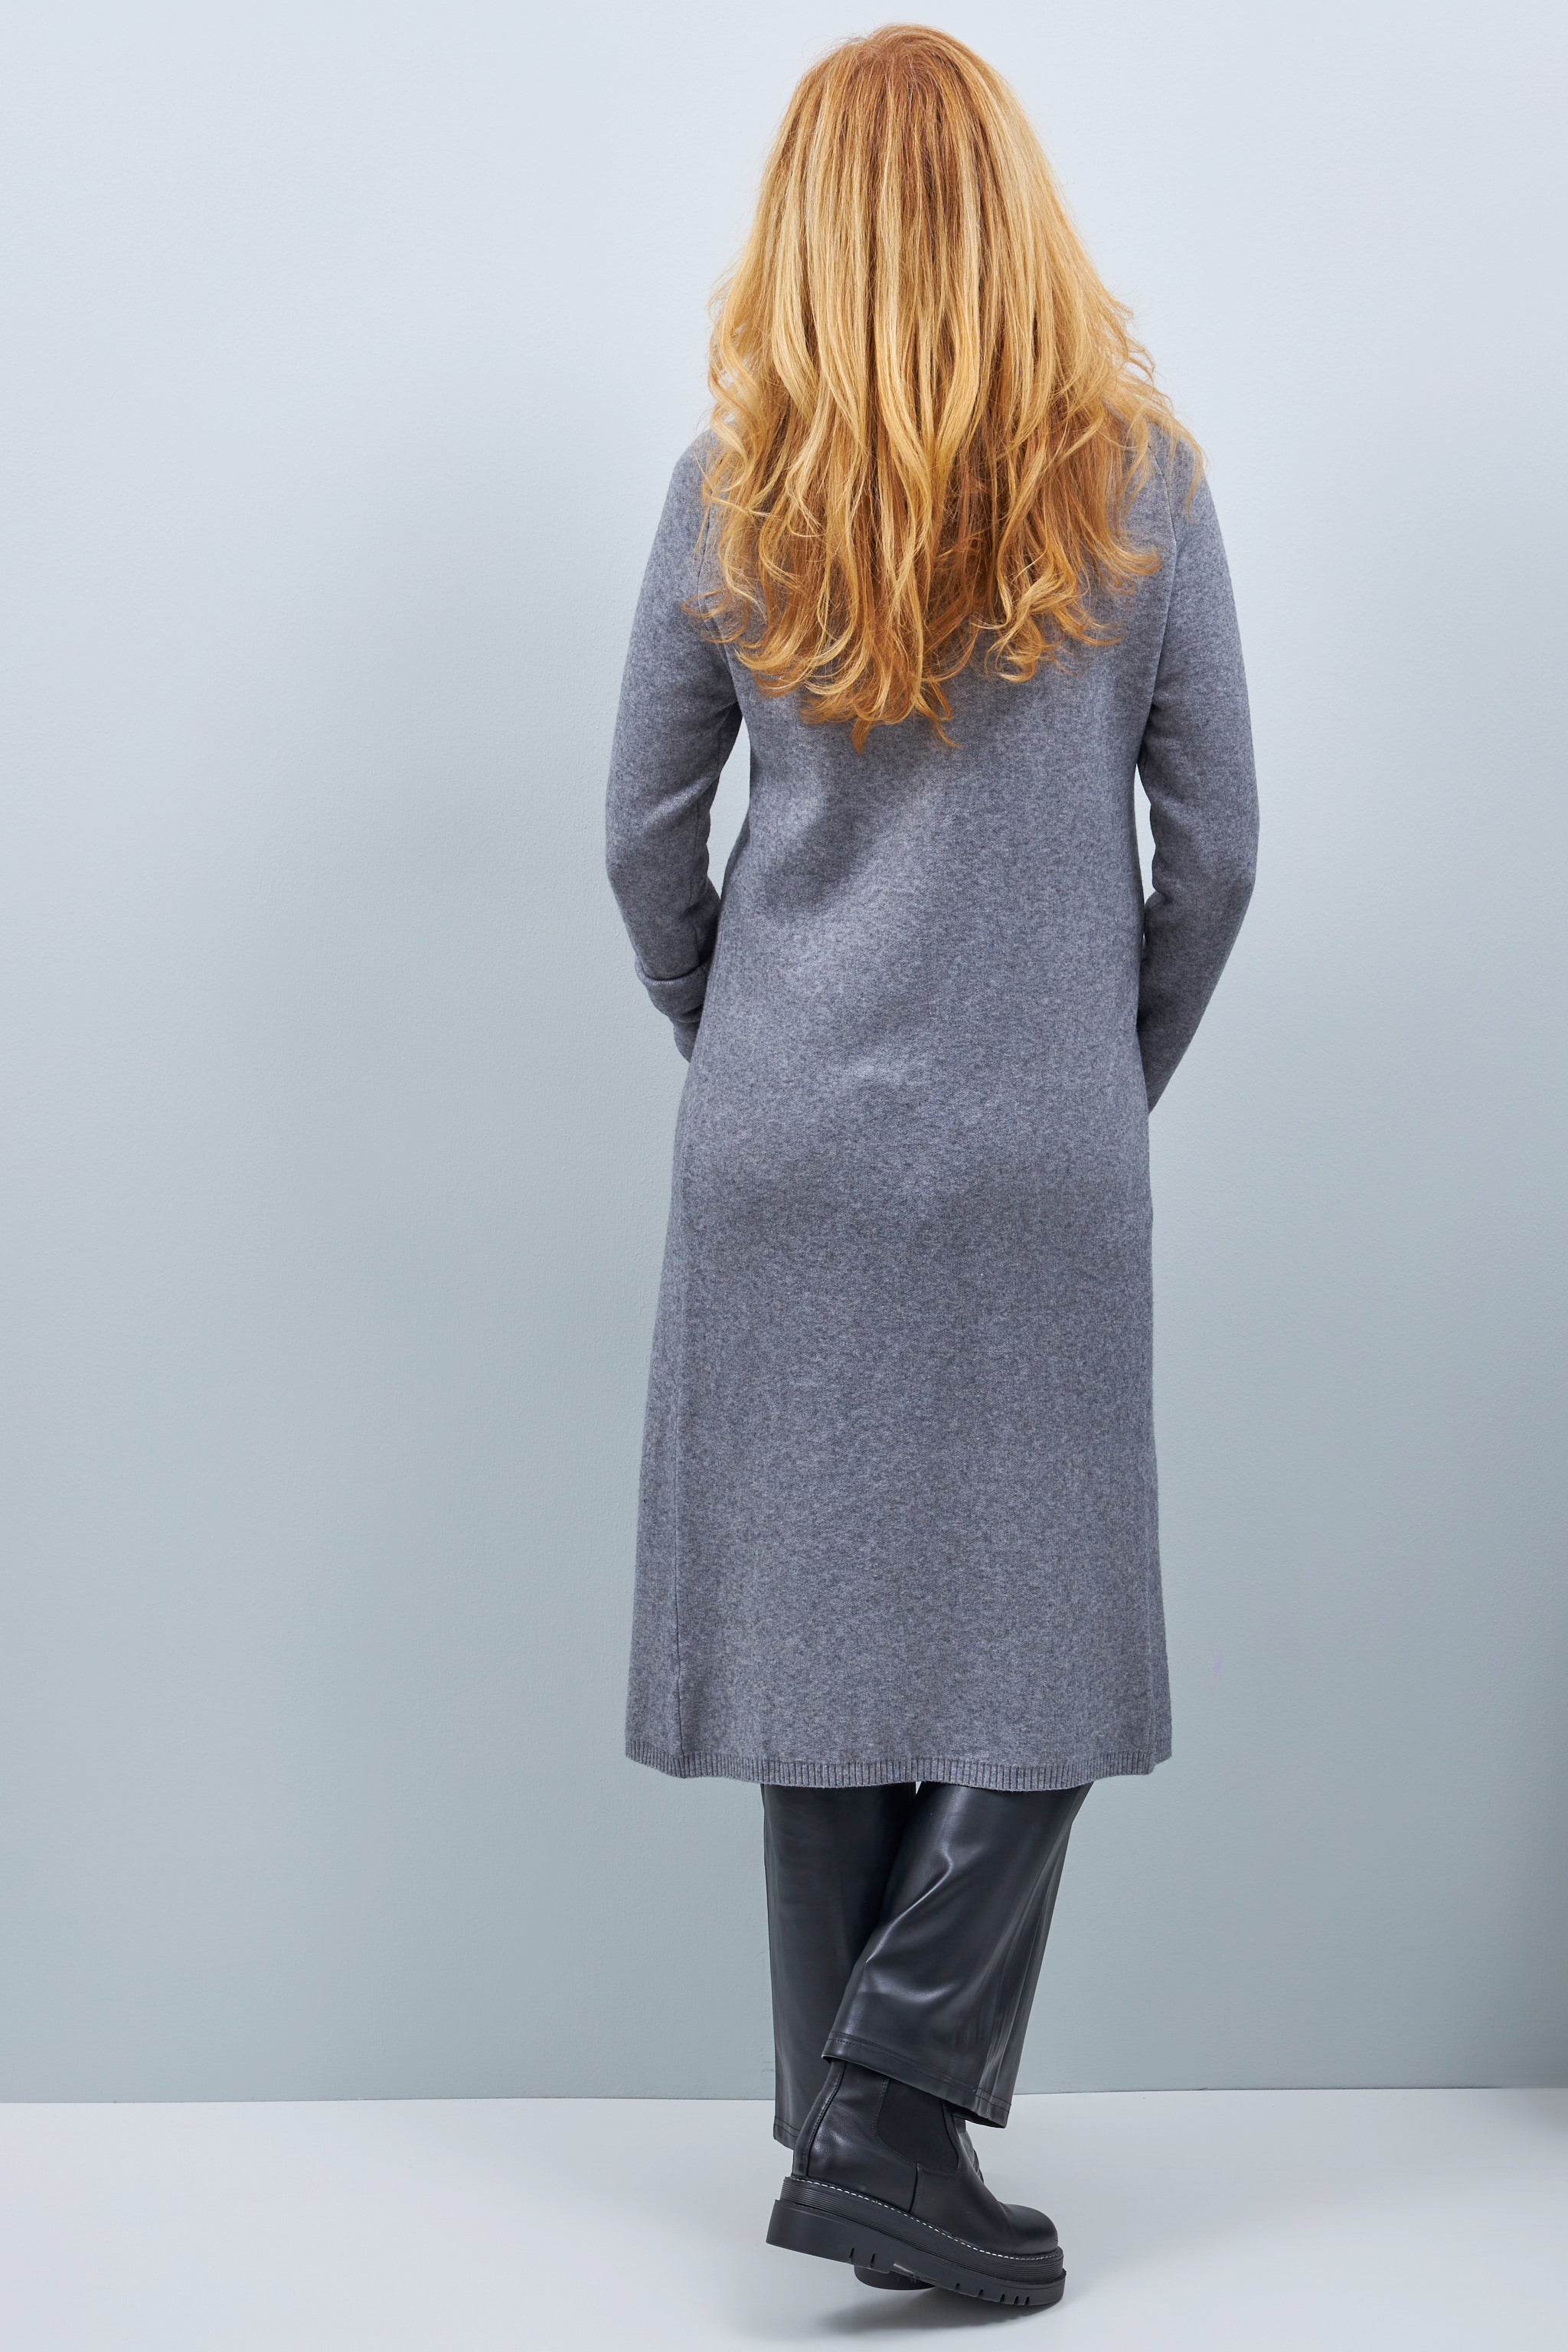 Long sweater with a long slit, grey